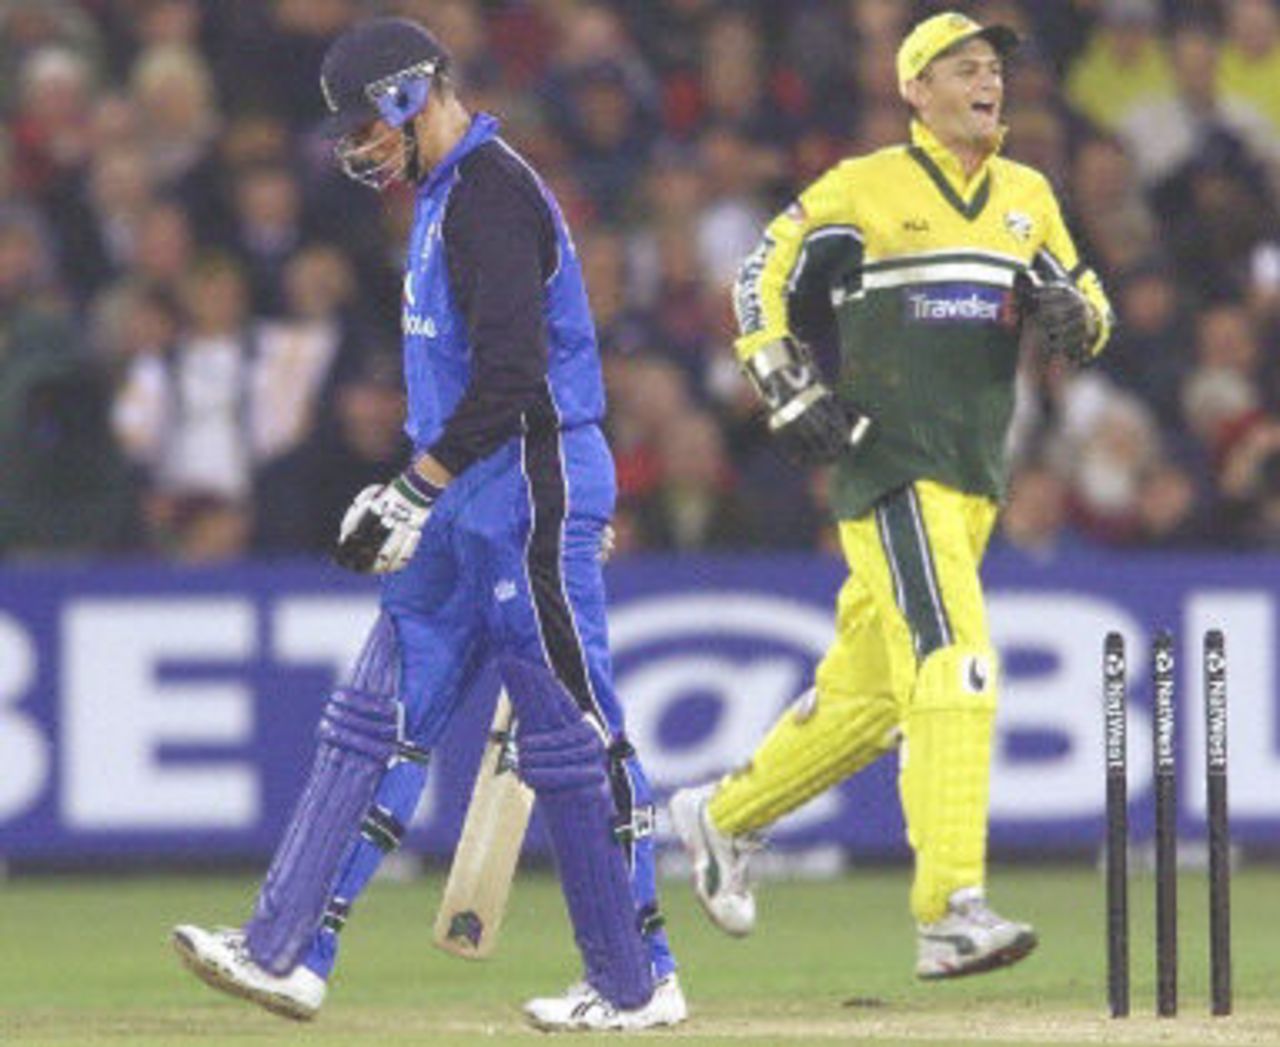 Marcus Trescothick looks dejected after been bowled by Glenn McGrath as Adam Gilchrist celebrates, 5th ODI at Old Trafford,14 June 2001.